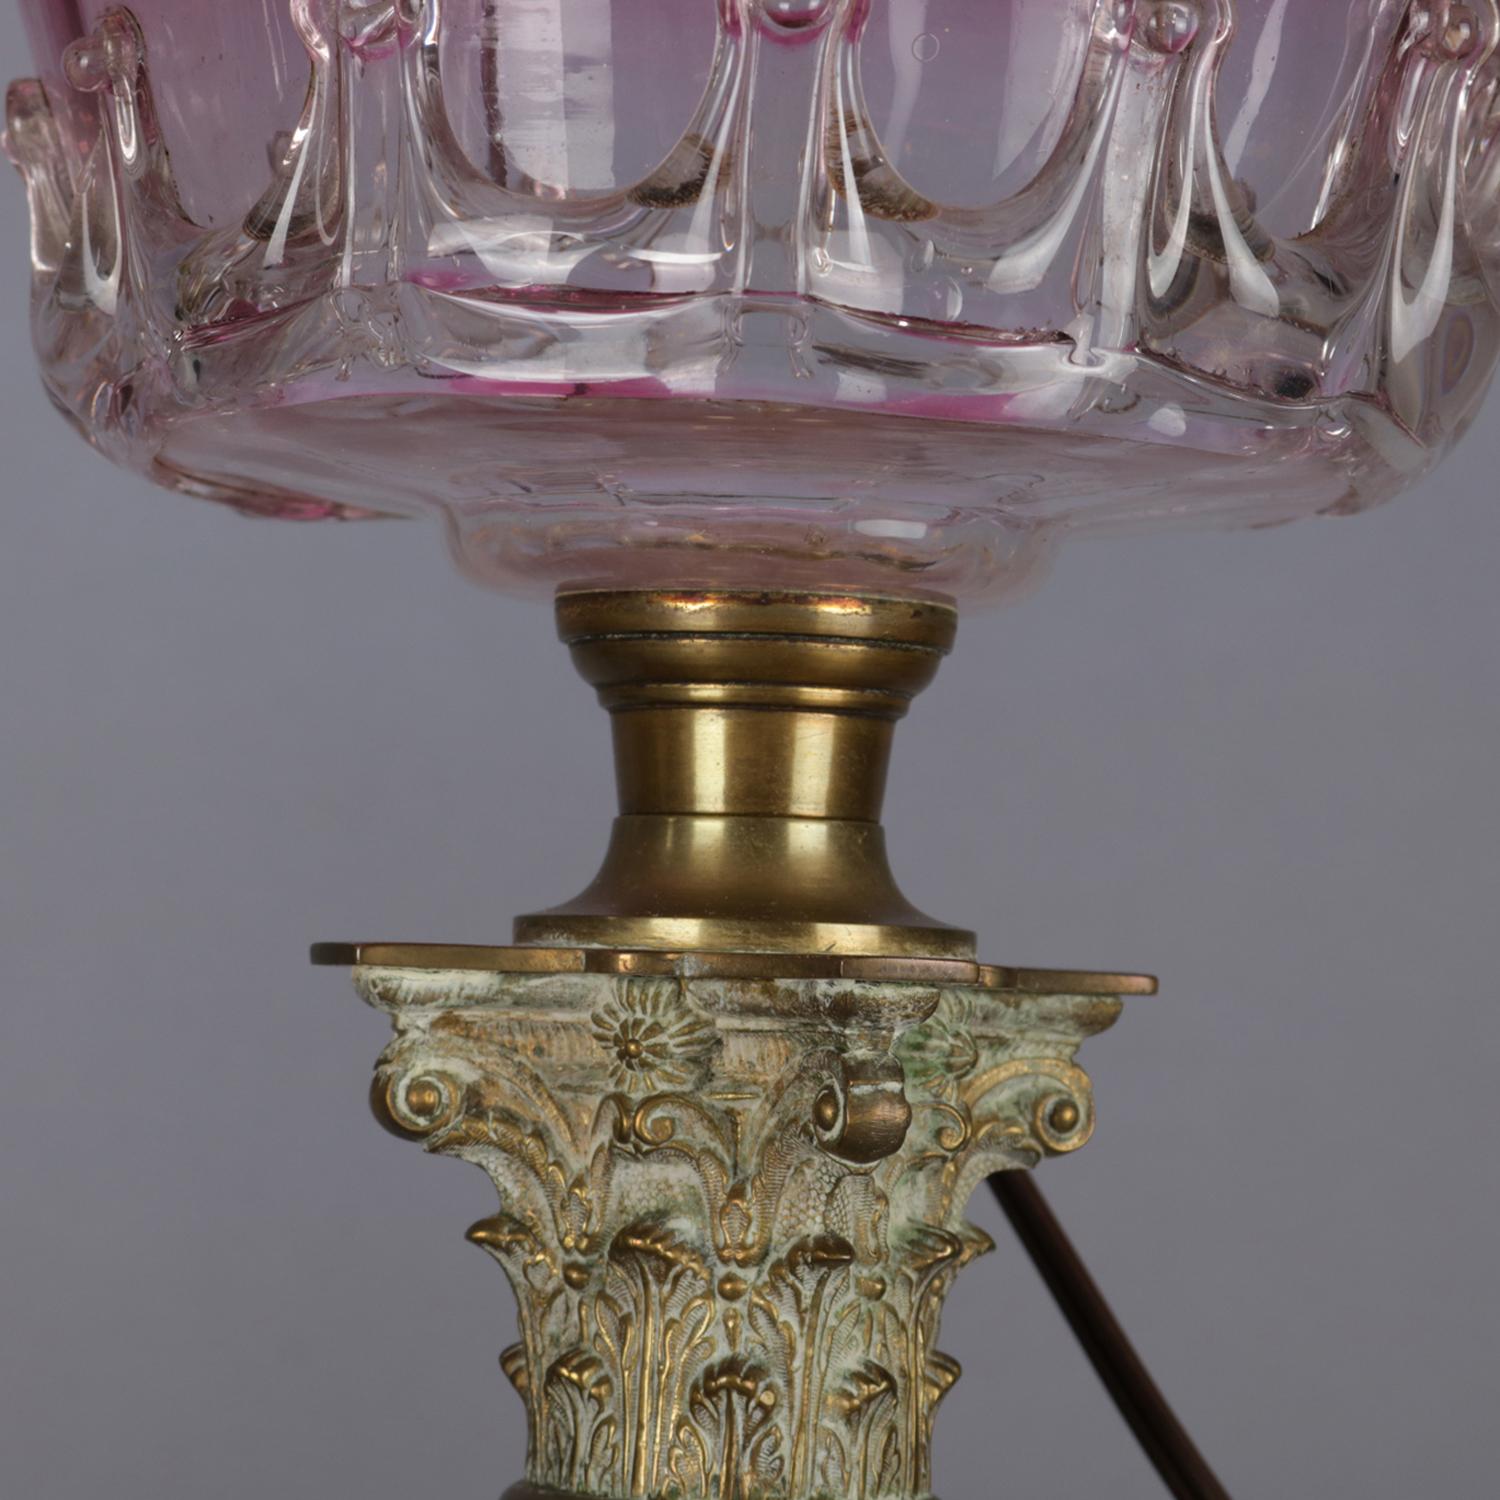 Victorian Antique Pair of Rubina Glass and Brass Electrified Oil Parlor Lamps, circa 1840